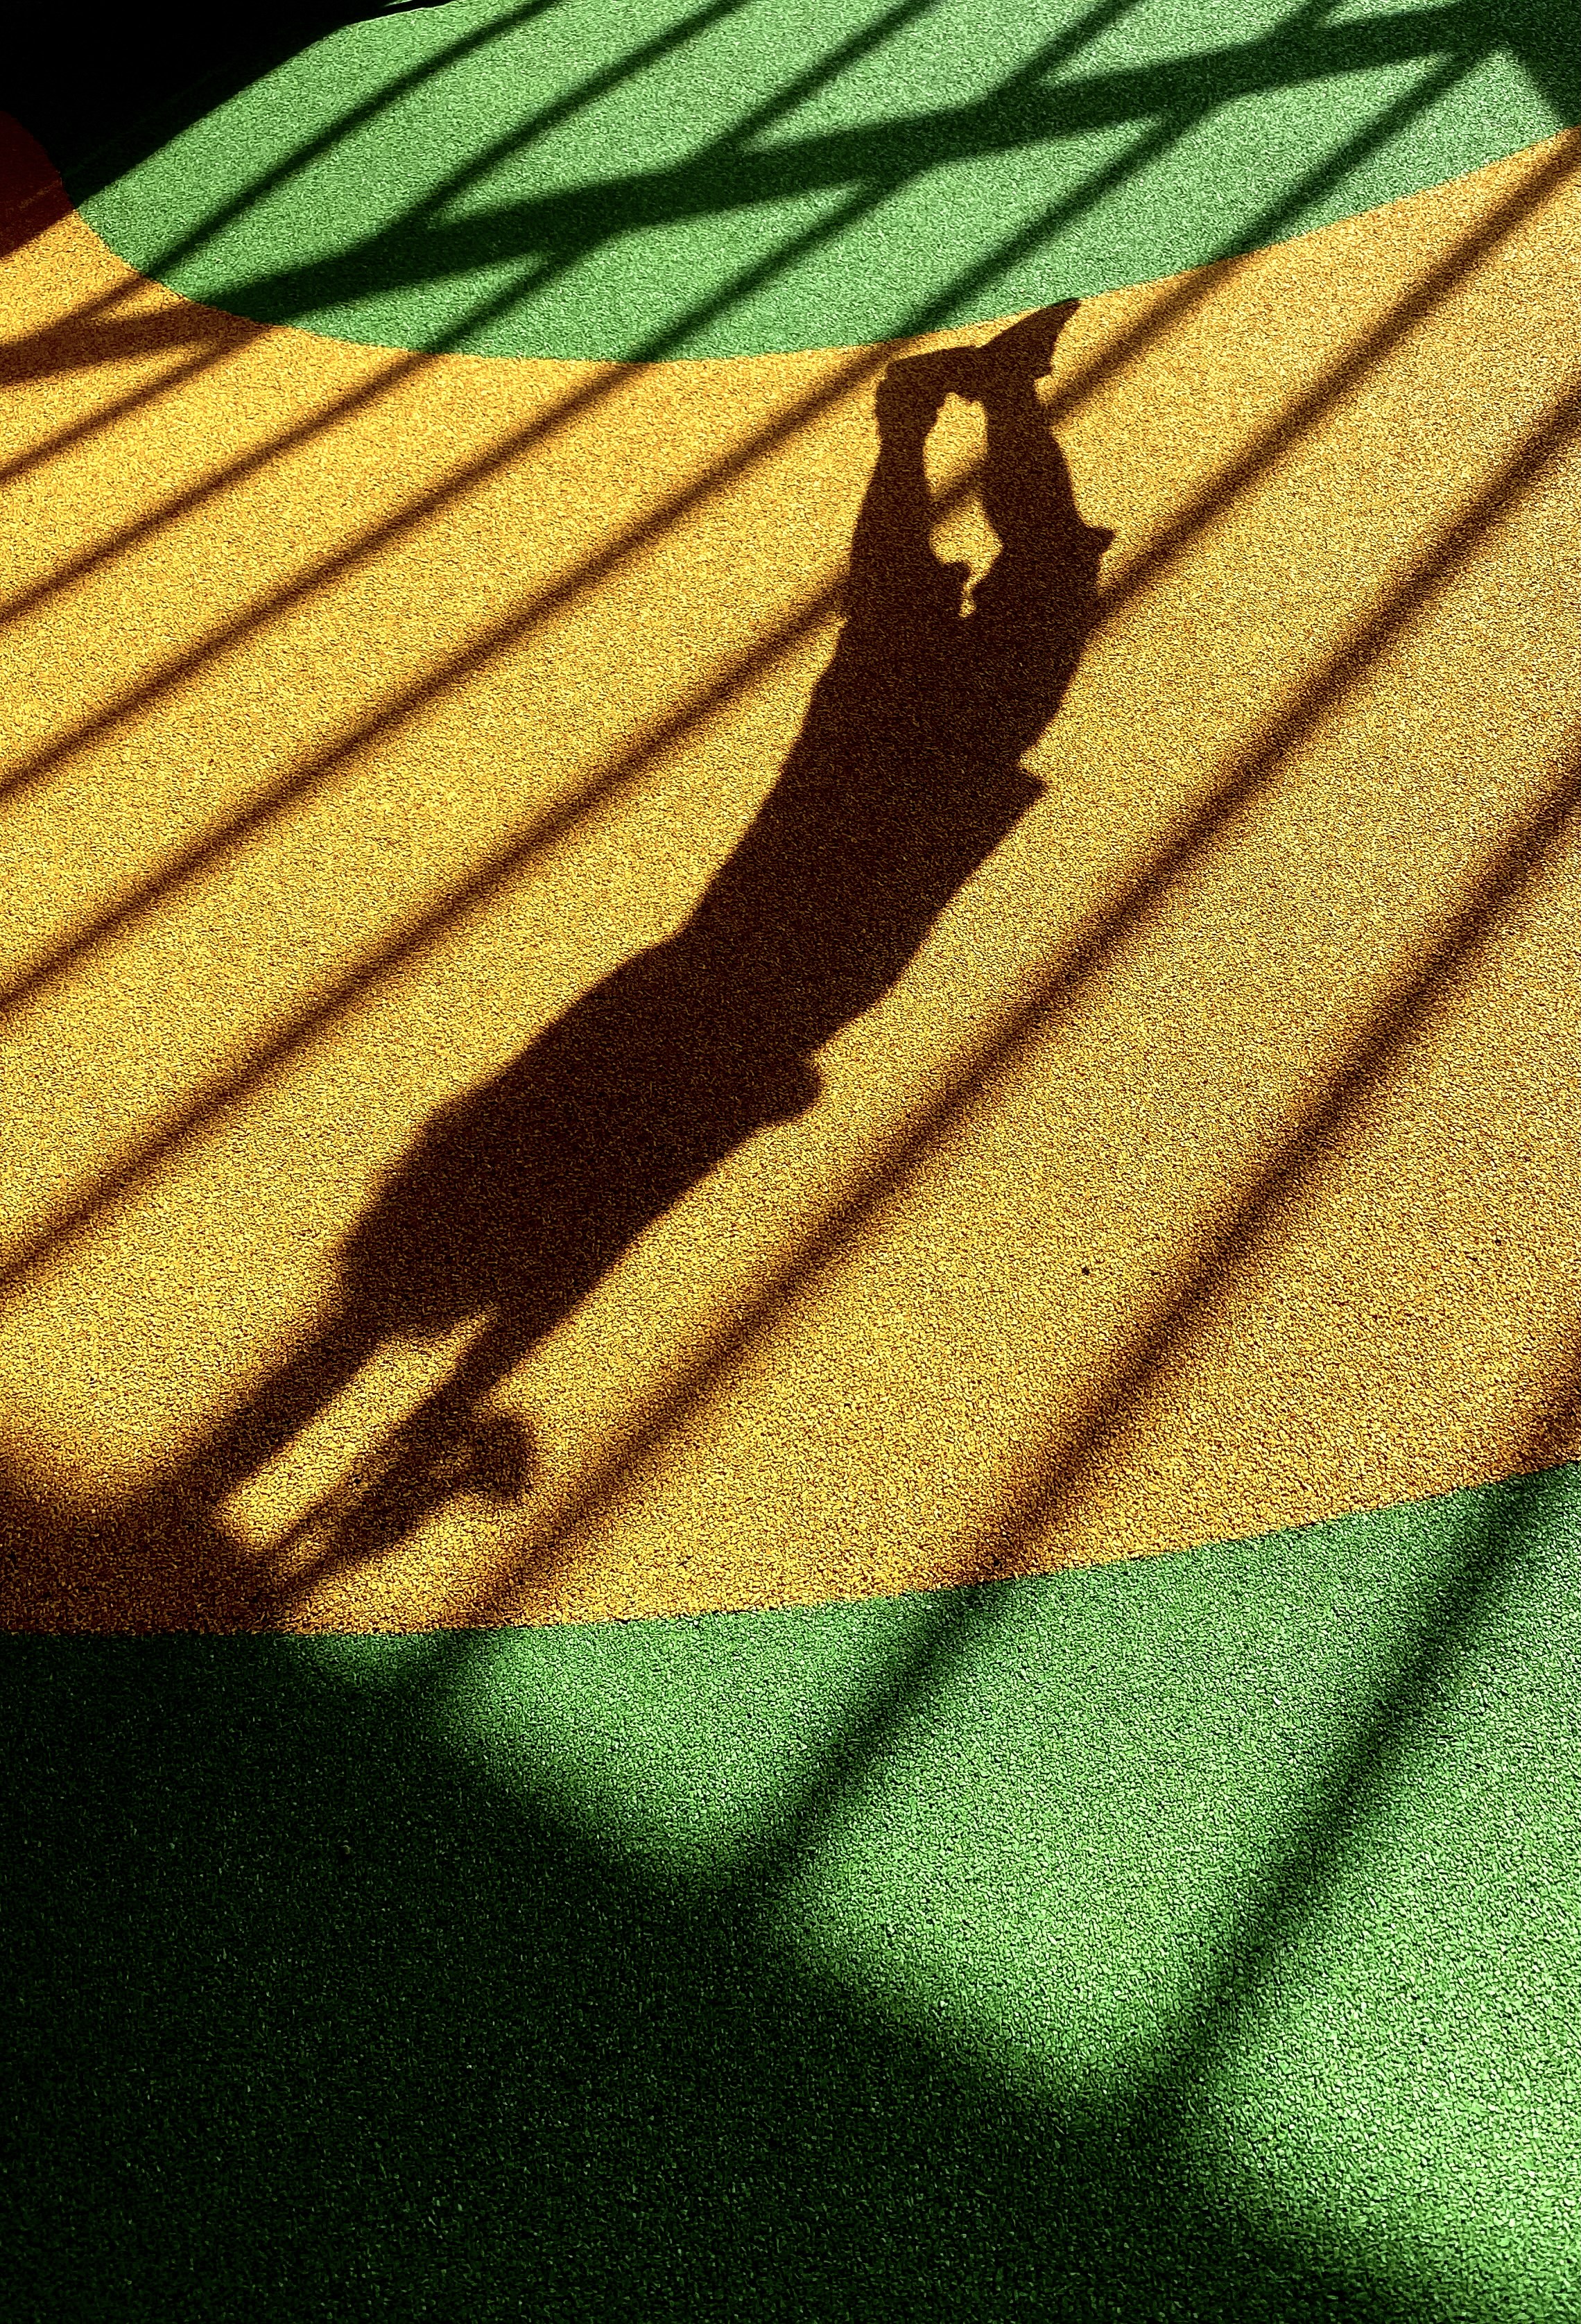 Abstract photo of a basketball court